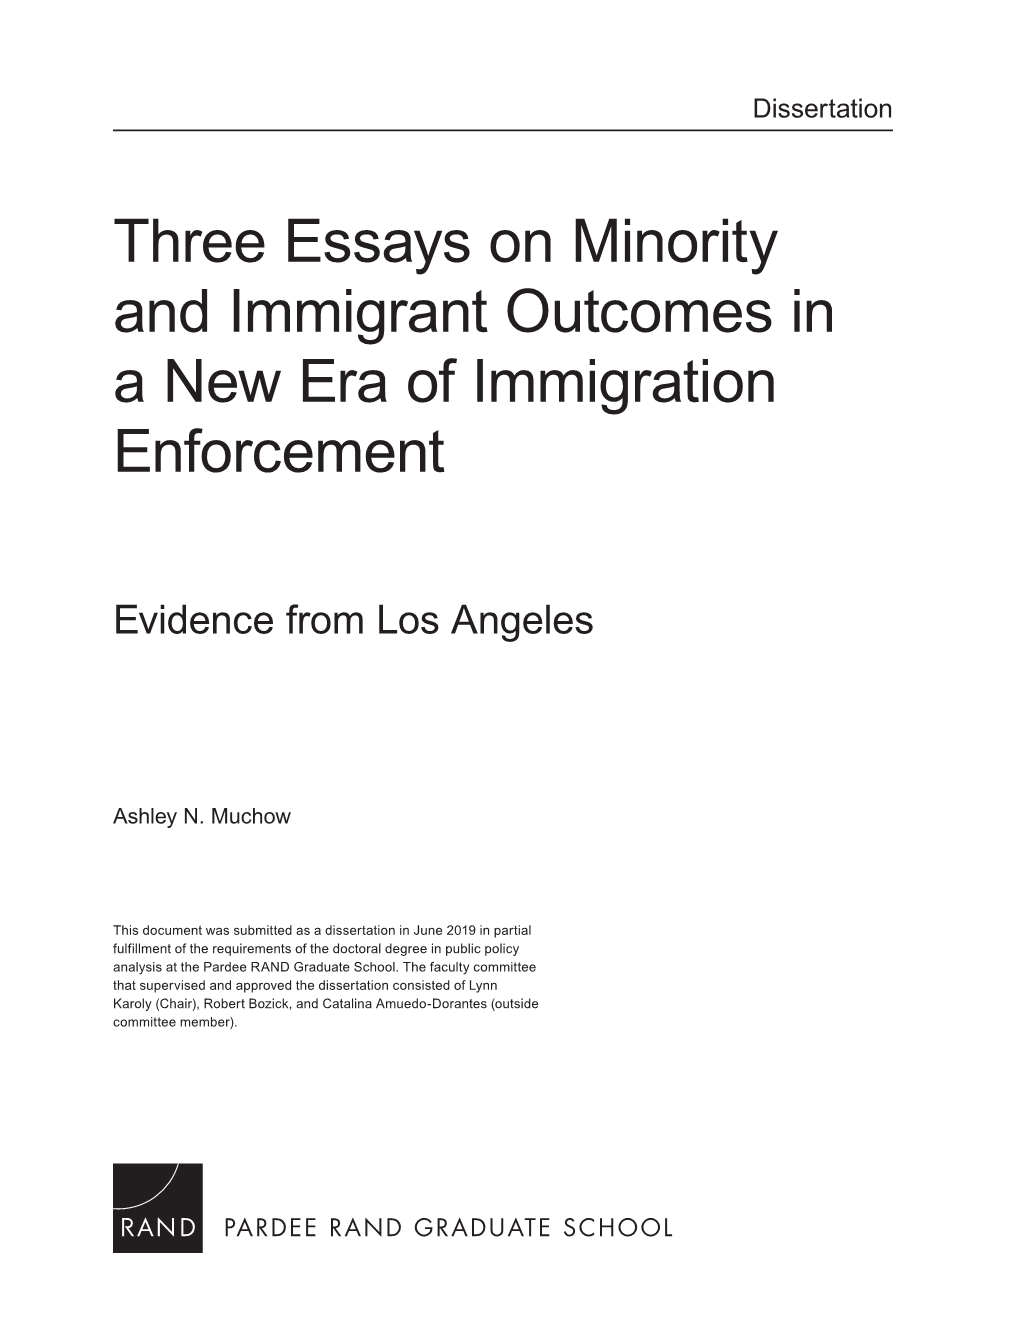 Three Essays on Minority and Immigrant Outcomes in a New Era of Immigration Enforcement